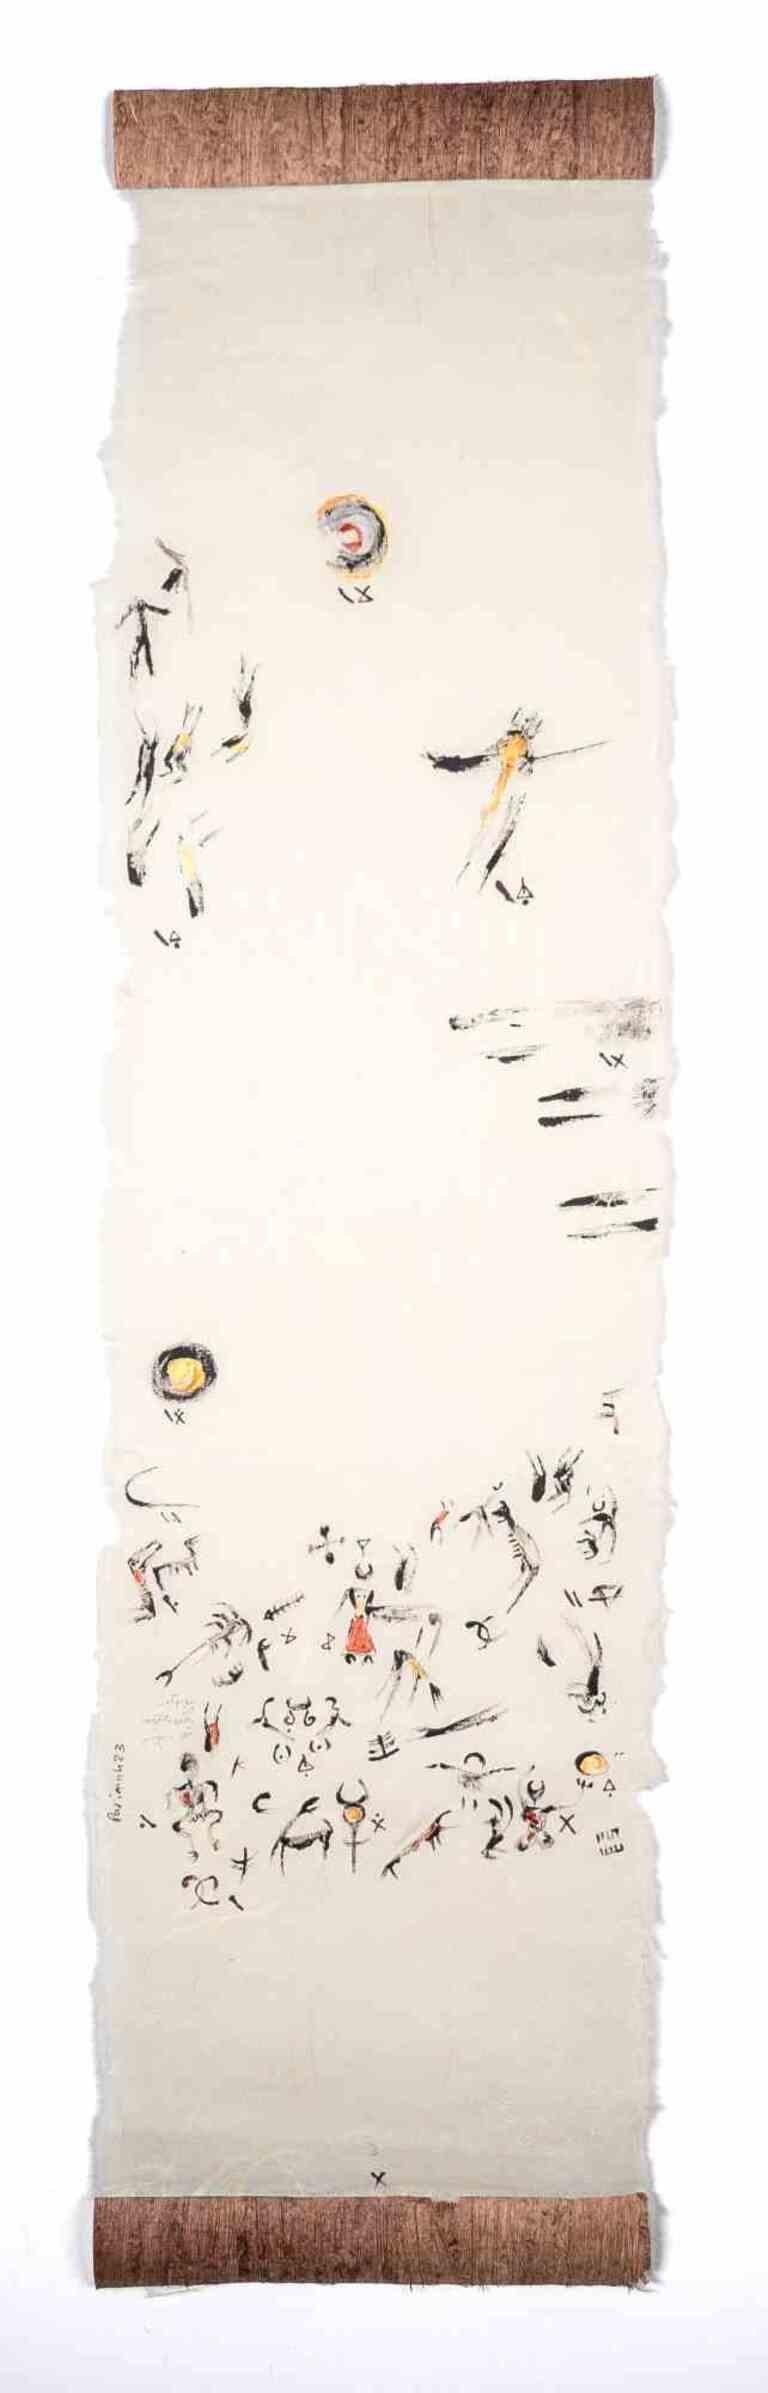 Messenger of the Afterlife is a Drawing realized by Iranian artist and Poet Parimah Avani in 2023.

China ink, acrylic on Japanese Washi Haruki paper with applied Papyrus, Plettenberg, DE.

Exhibited in " Heroine's Journey" 2023, in Gallery hall of